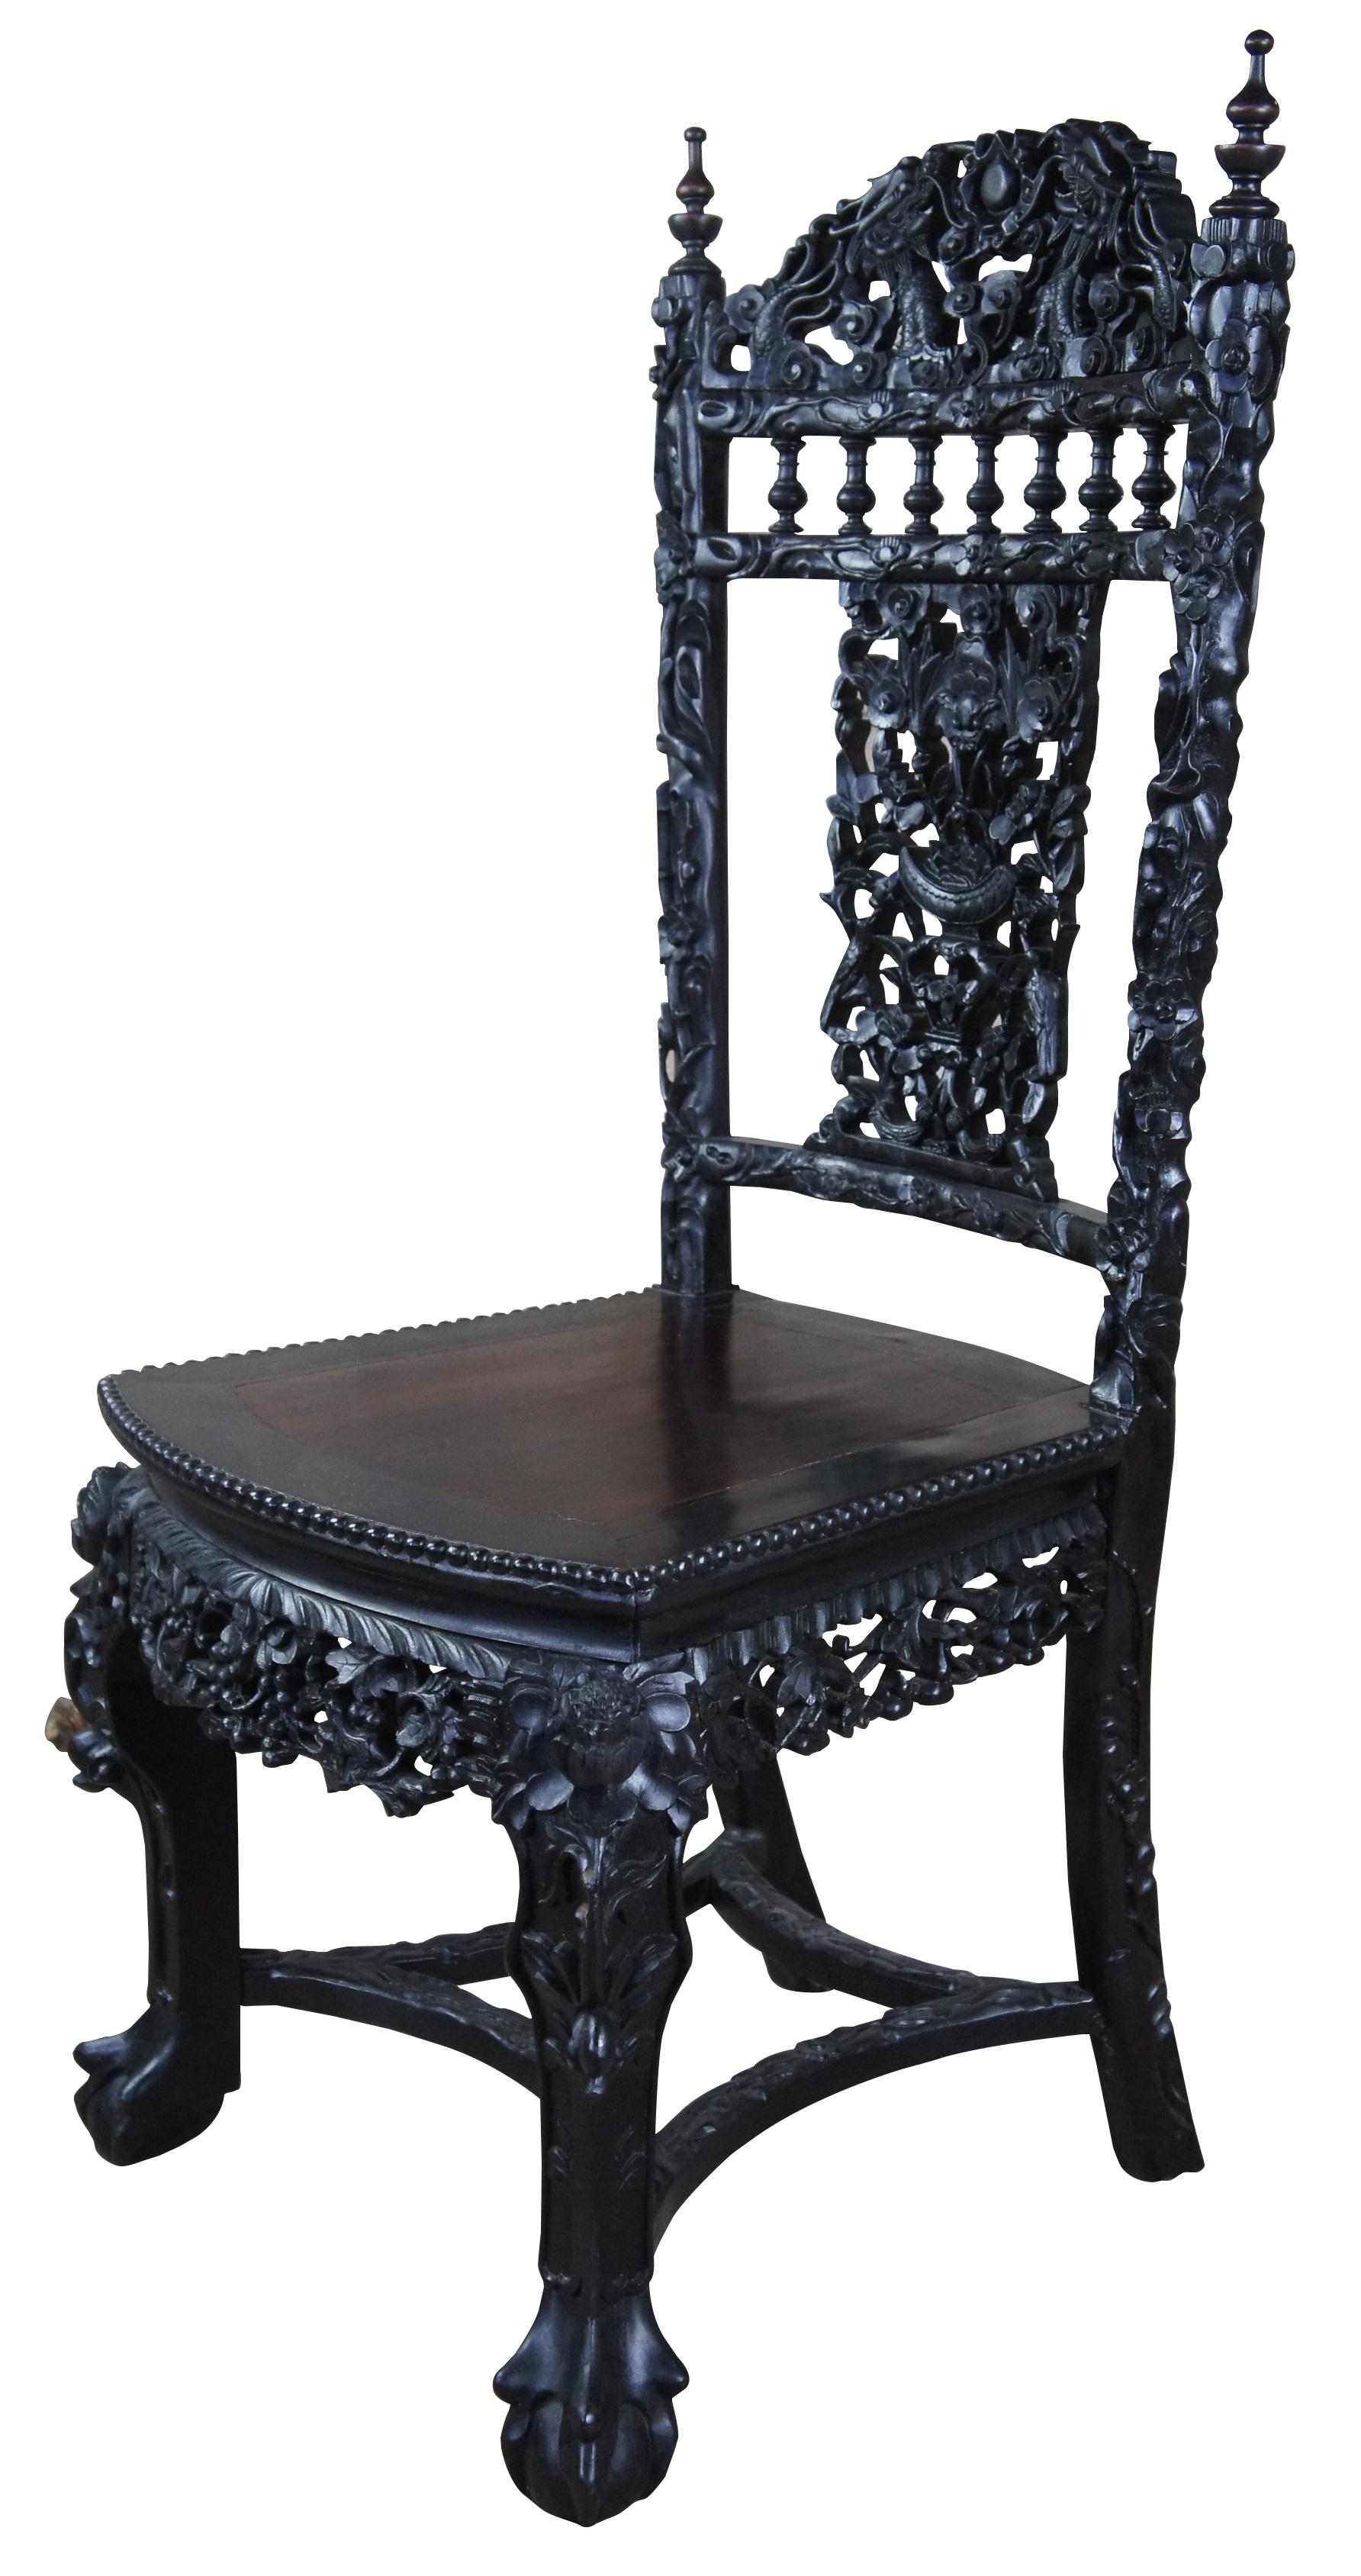 Antique Chinese side dining, scholars, or vanity chair. Made of ebonized Rosewood featuring highly ornate gothic inspired carvings with dragons, bats, squirrels, flowers, nuts, berrys, with beaded edge, finials, and ball and claw feet. This hardwood